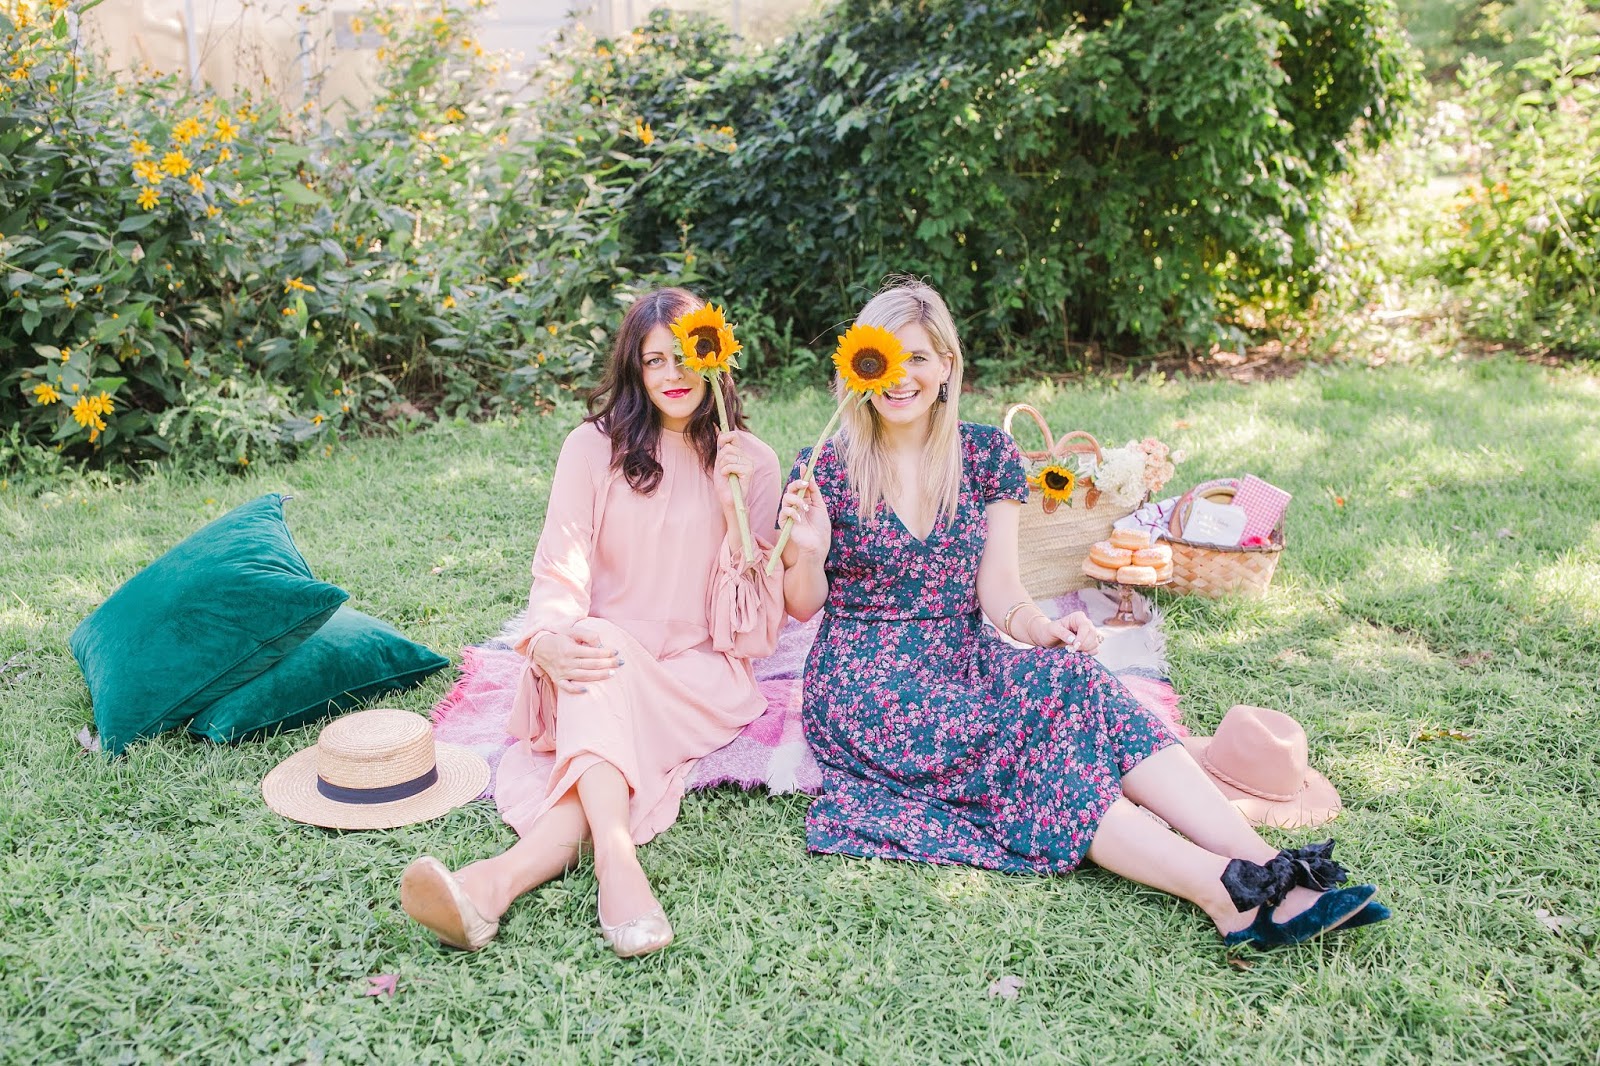 Bijuelni | How To Make New Friends as an Adult - Colourful fall pic nic